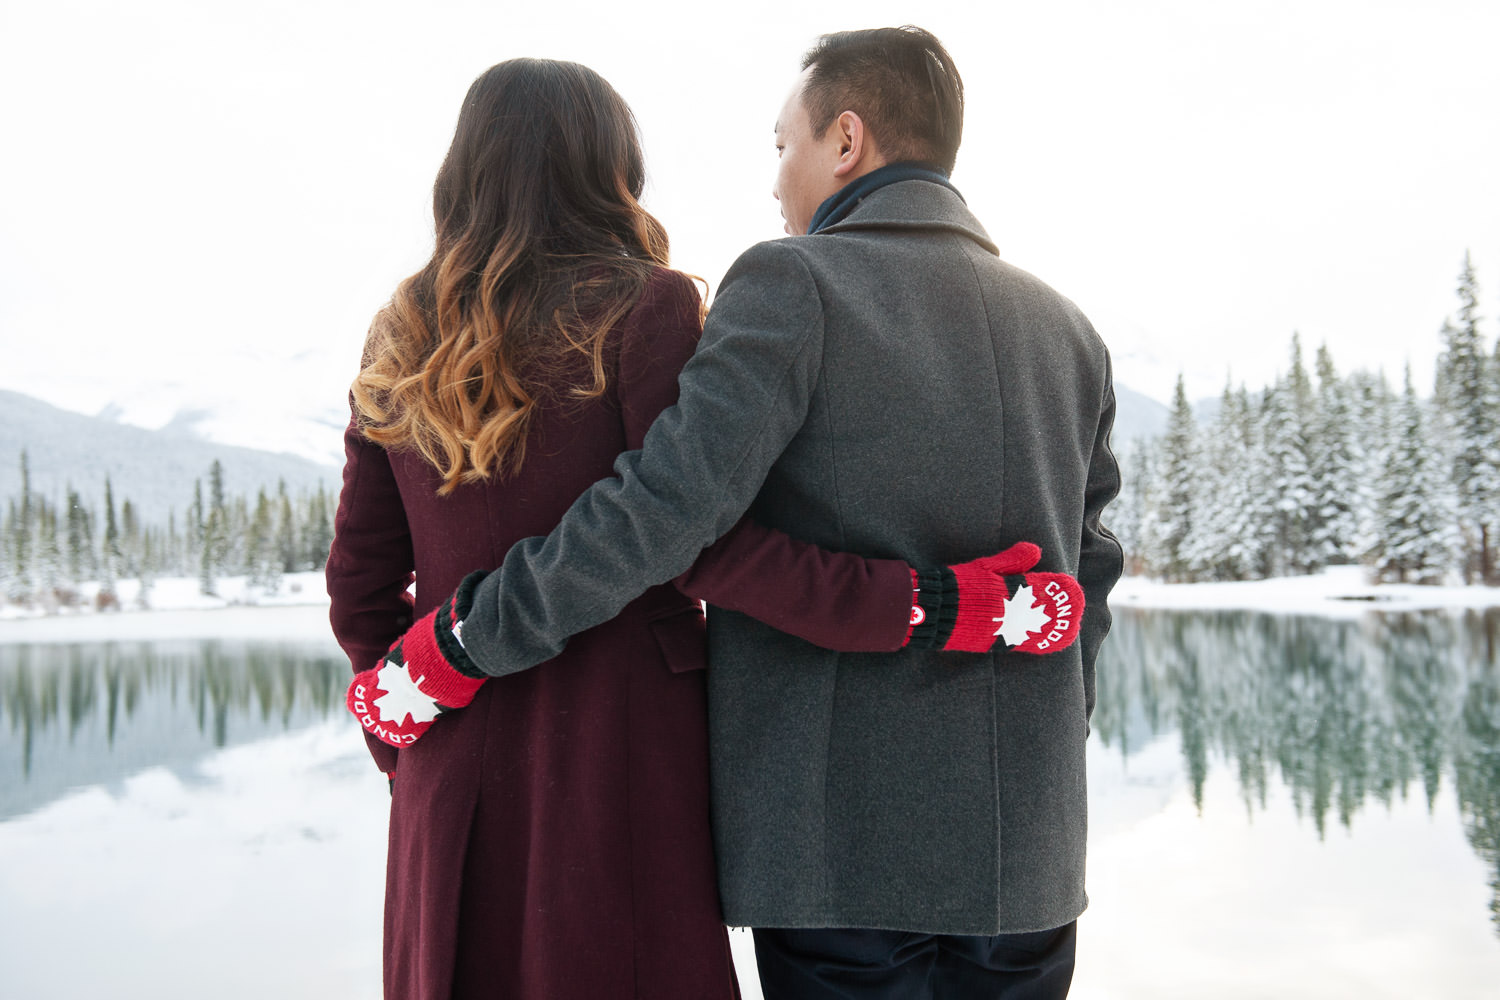 If you need casual wardrobe ideas for a winter engagement, not forget mittens